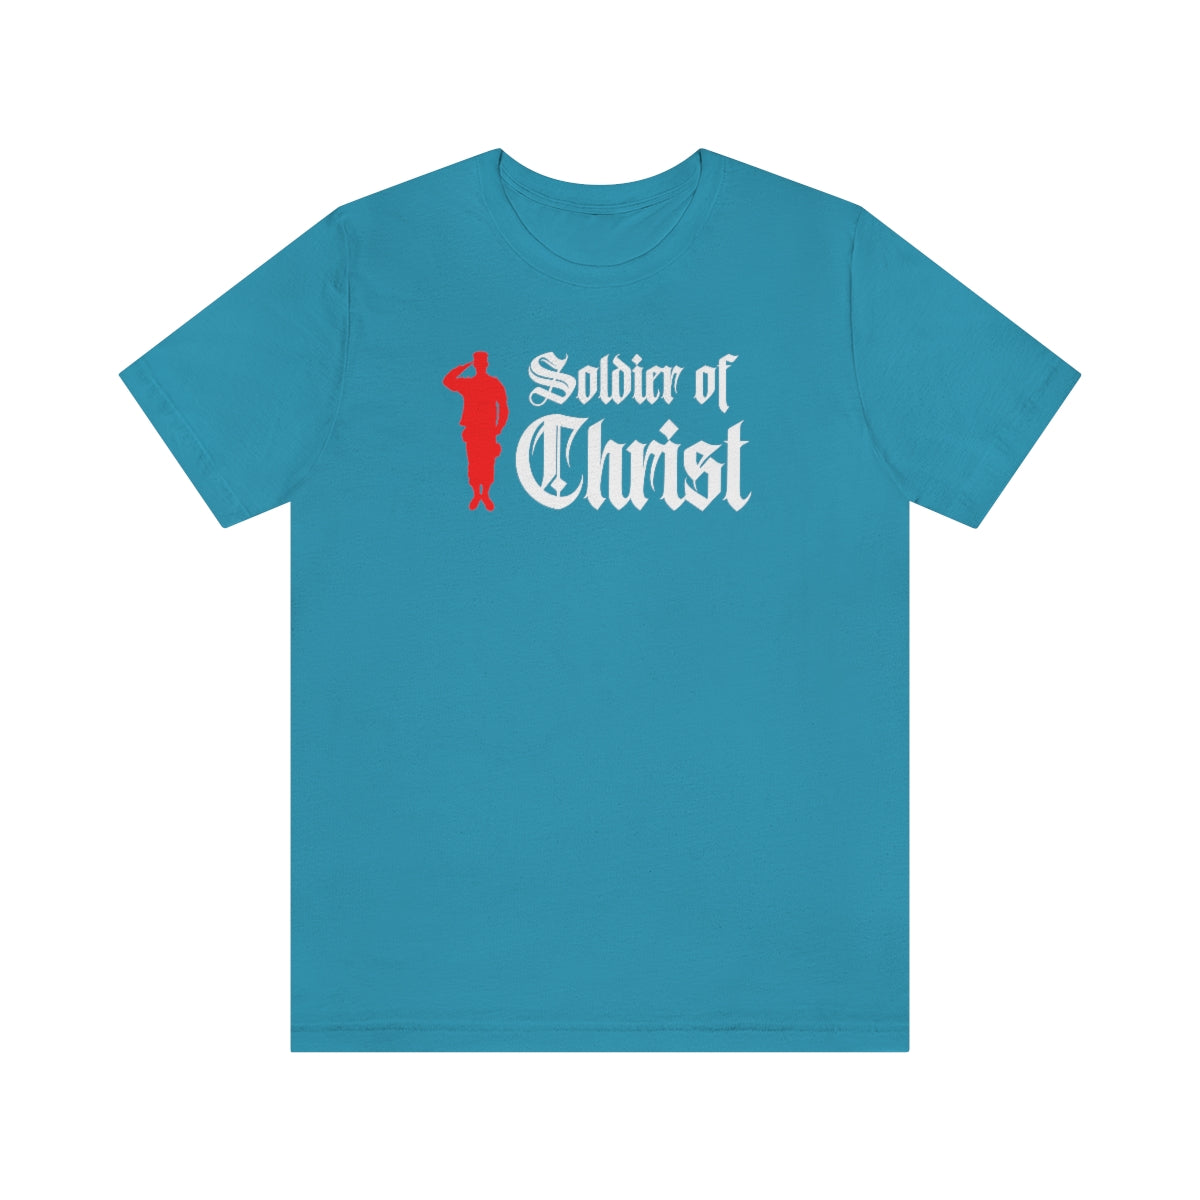 Soldier Of Christ Mens T-Shirt